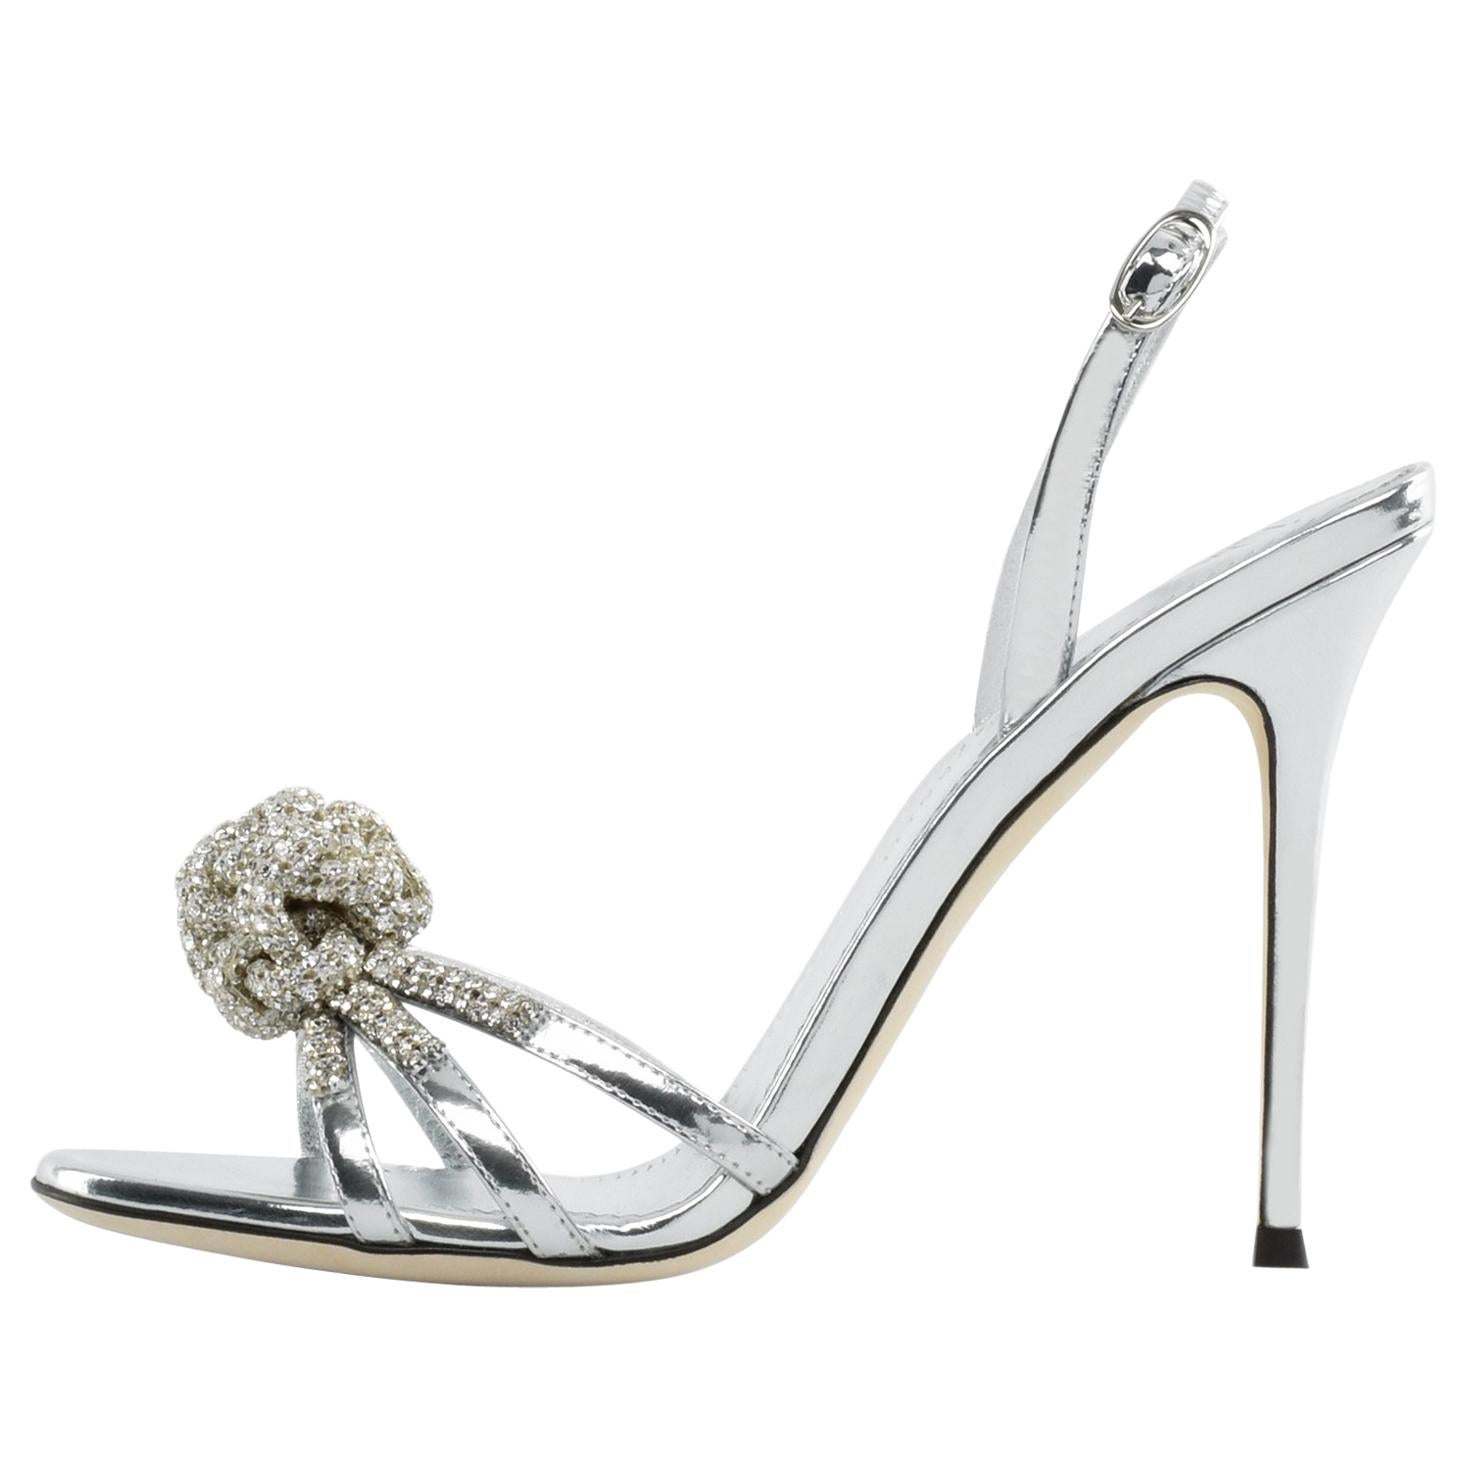 Giuseppe Zanotti NEW Silver Patent Leather Crystal Sandals Heels in Box ...